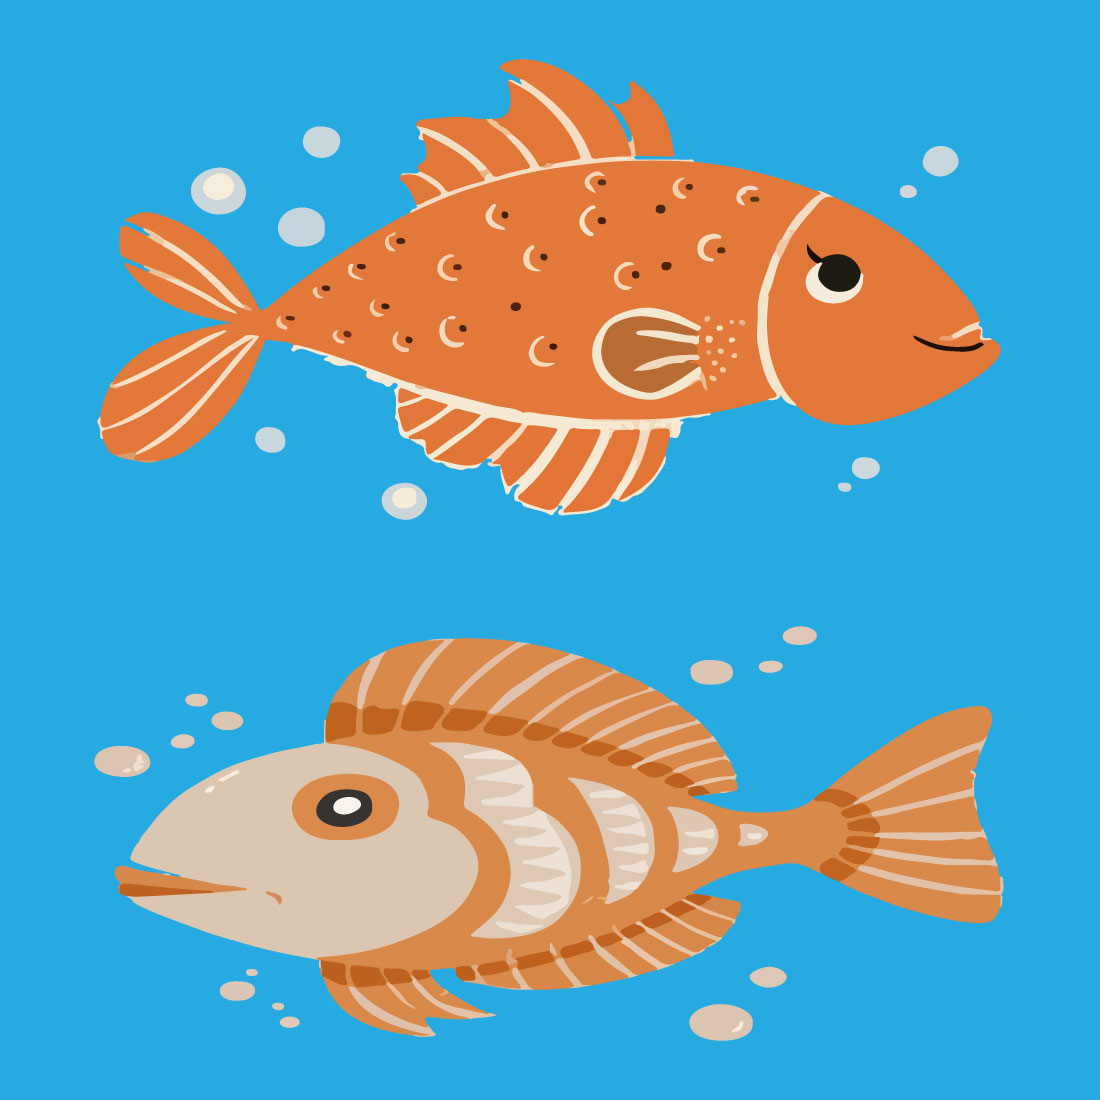 Fish vector design, move it any where cover image.